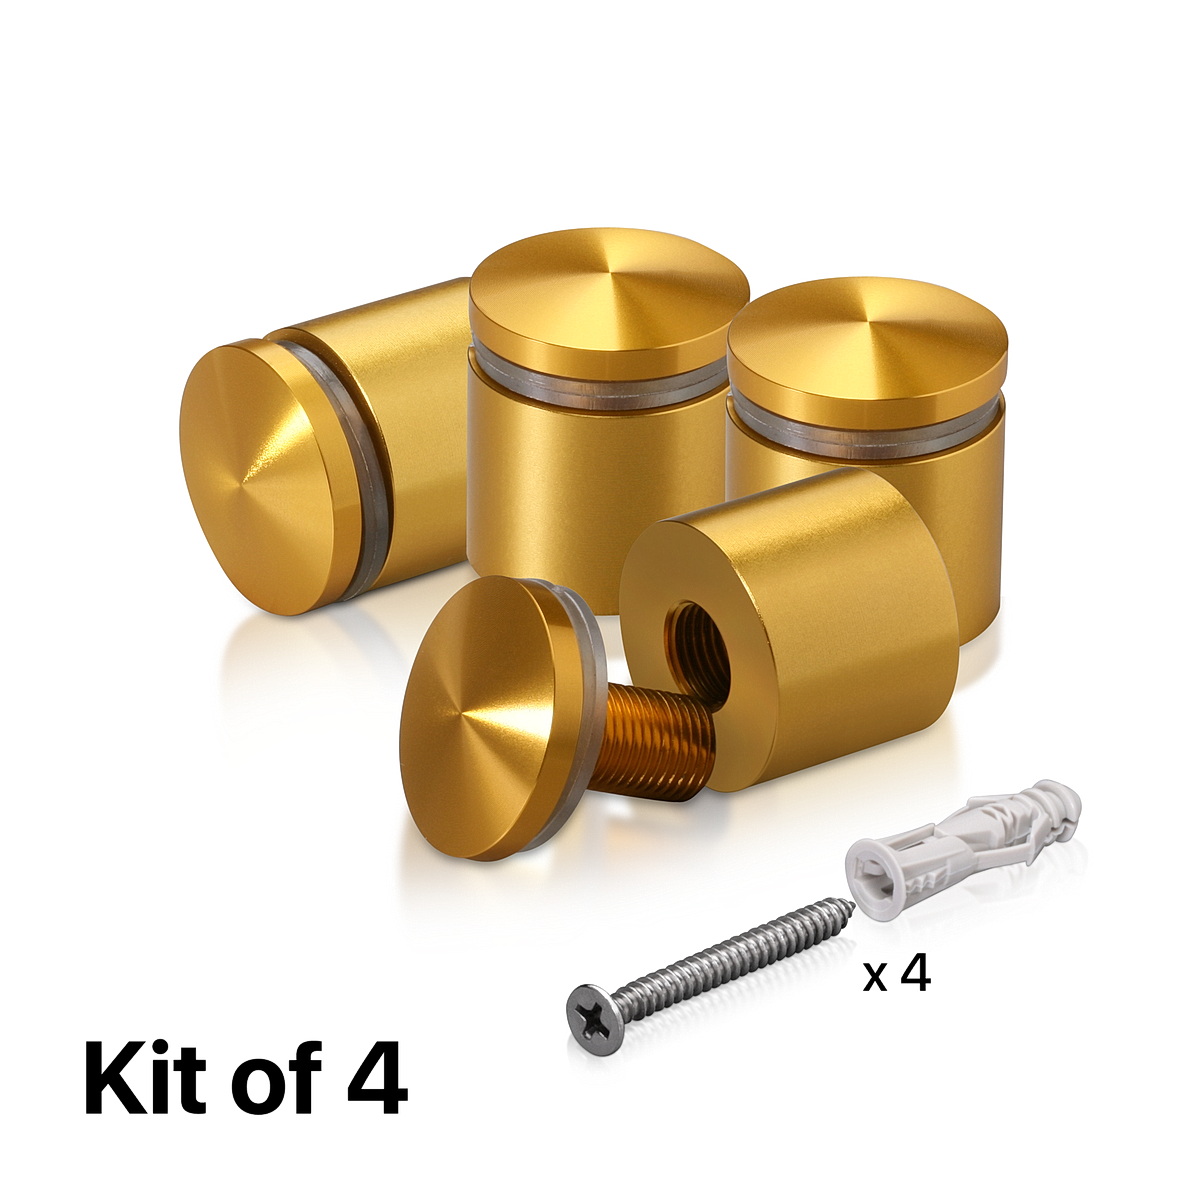 (Set of 4) 1'' Diameter X 3/4'' Barrel Length, Aluminum Rounded Head Standoffs, Gold Anodized Finish Standoff with (4) 2216Z Screws and (4) LANC1 Anchors for concrete or drywall (For Inside / Outside use) [Required Material Hole Size: 7/16'']